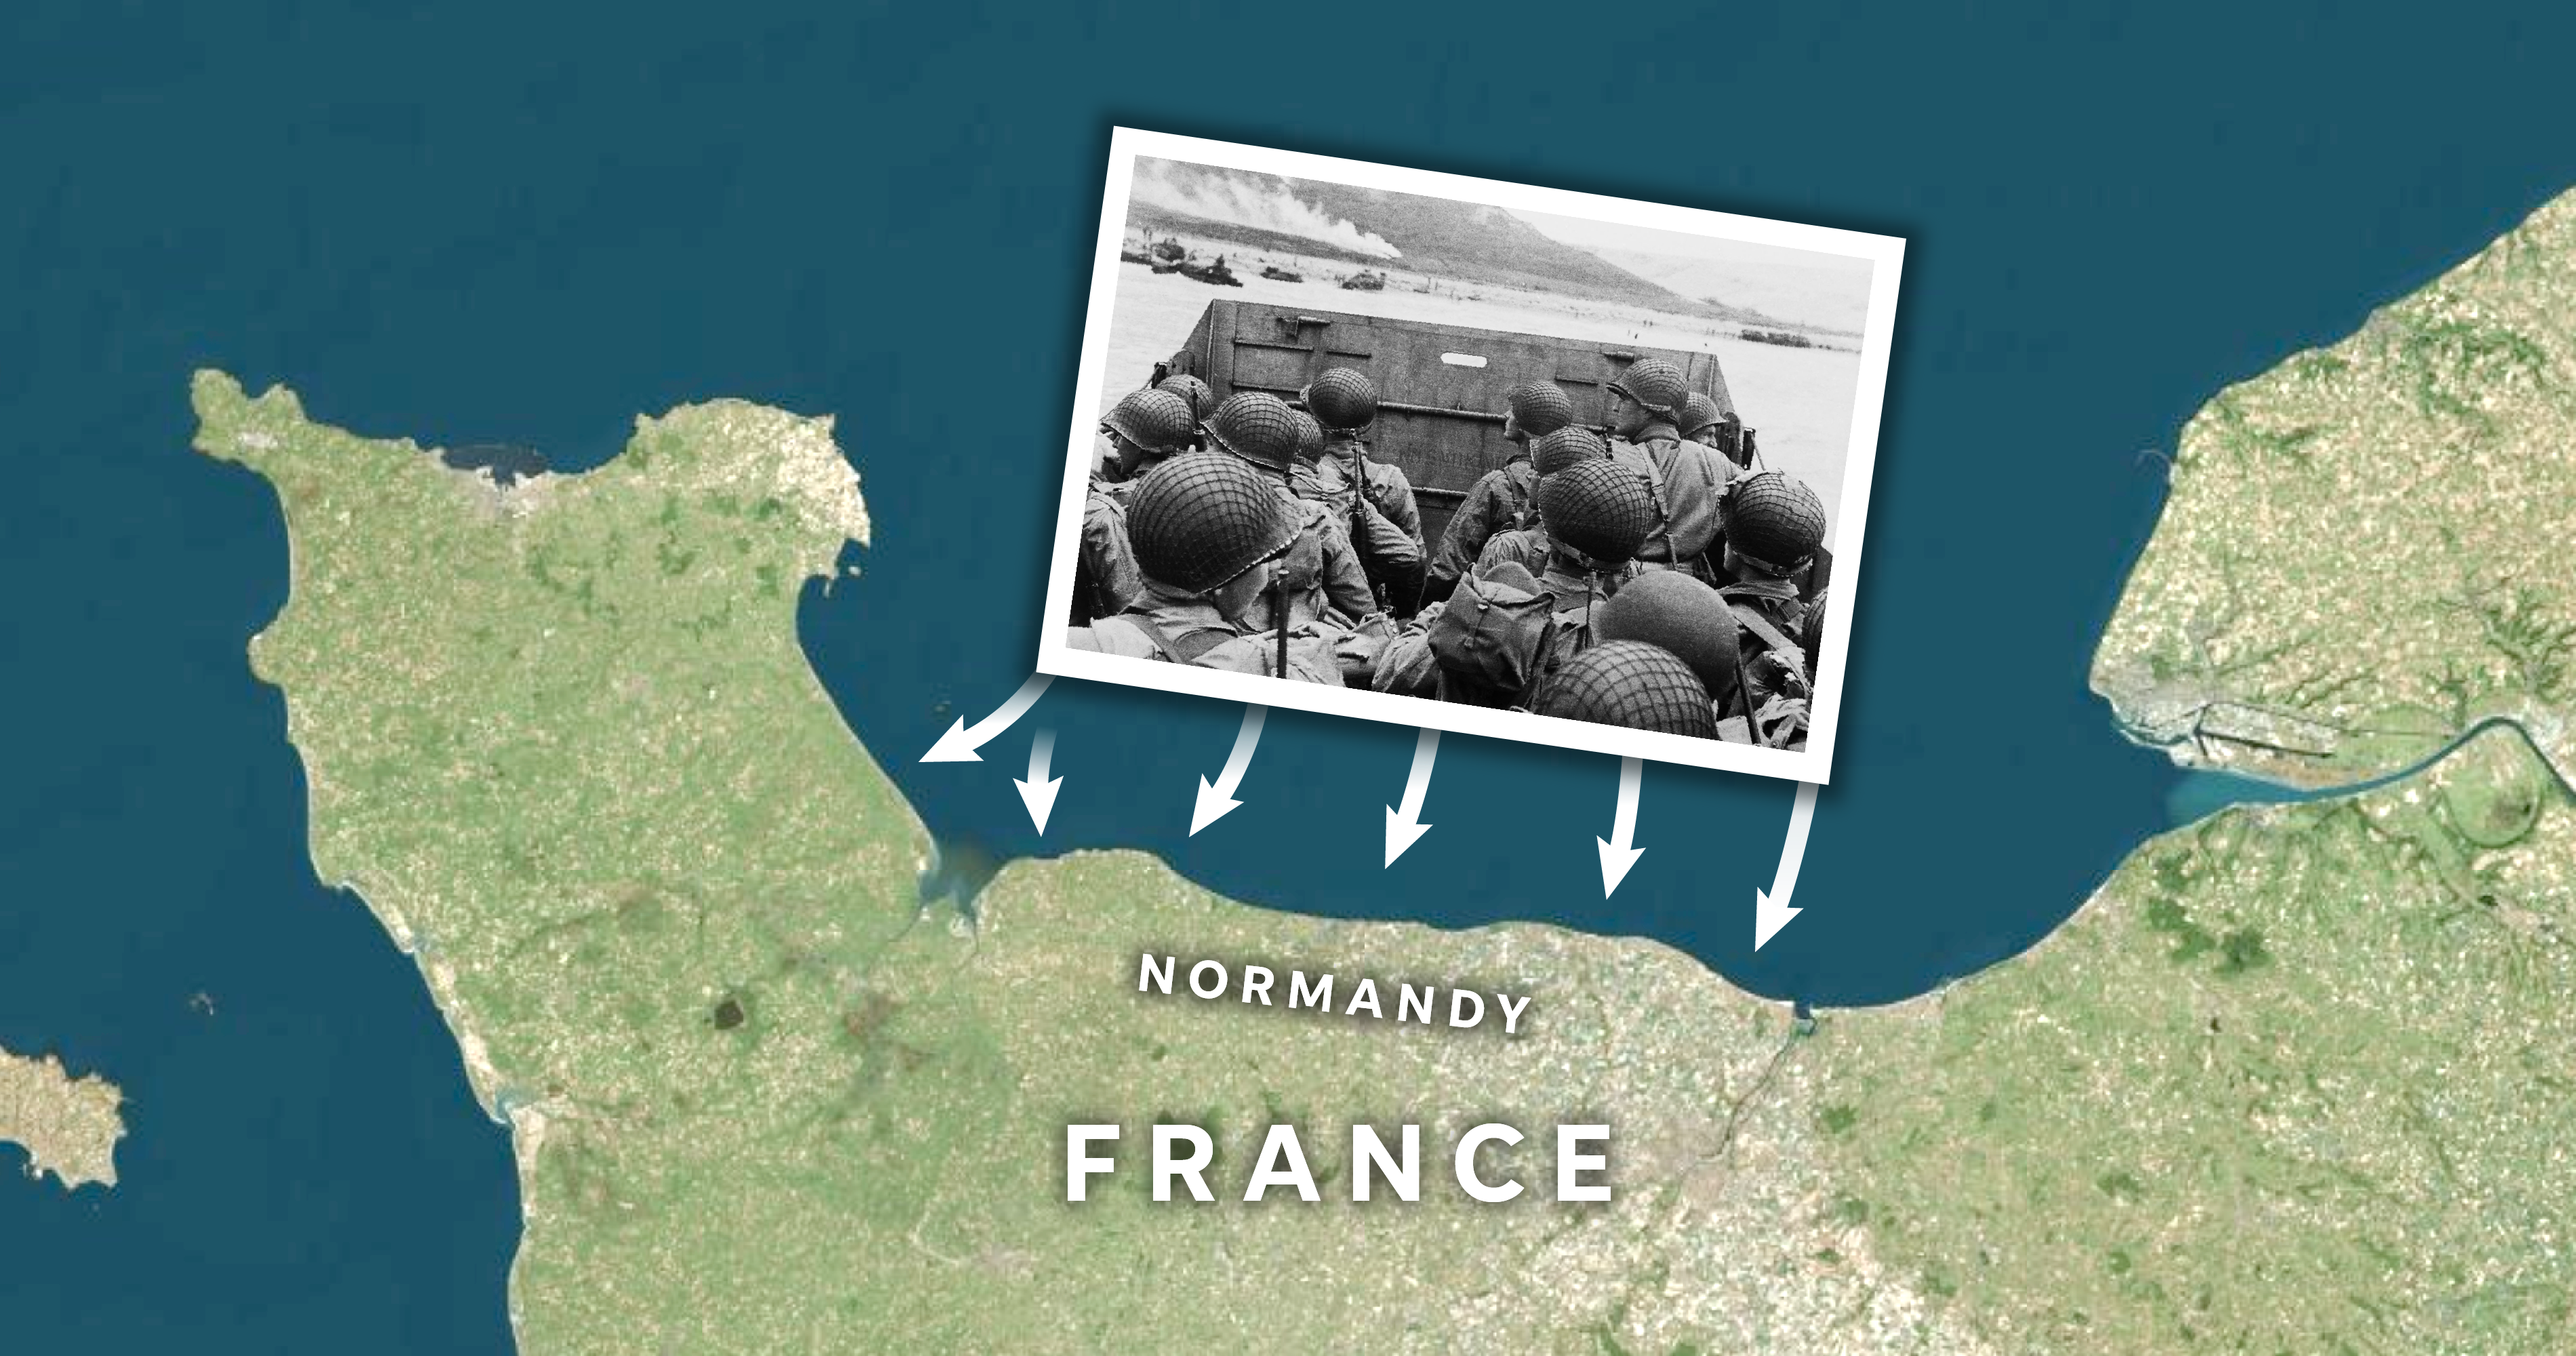 How many Iowans died in D-Day? Here's what you should know about the historic WWII battle